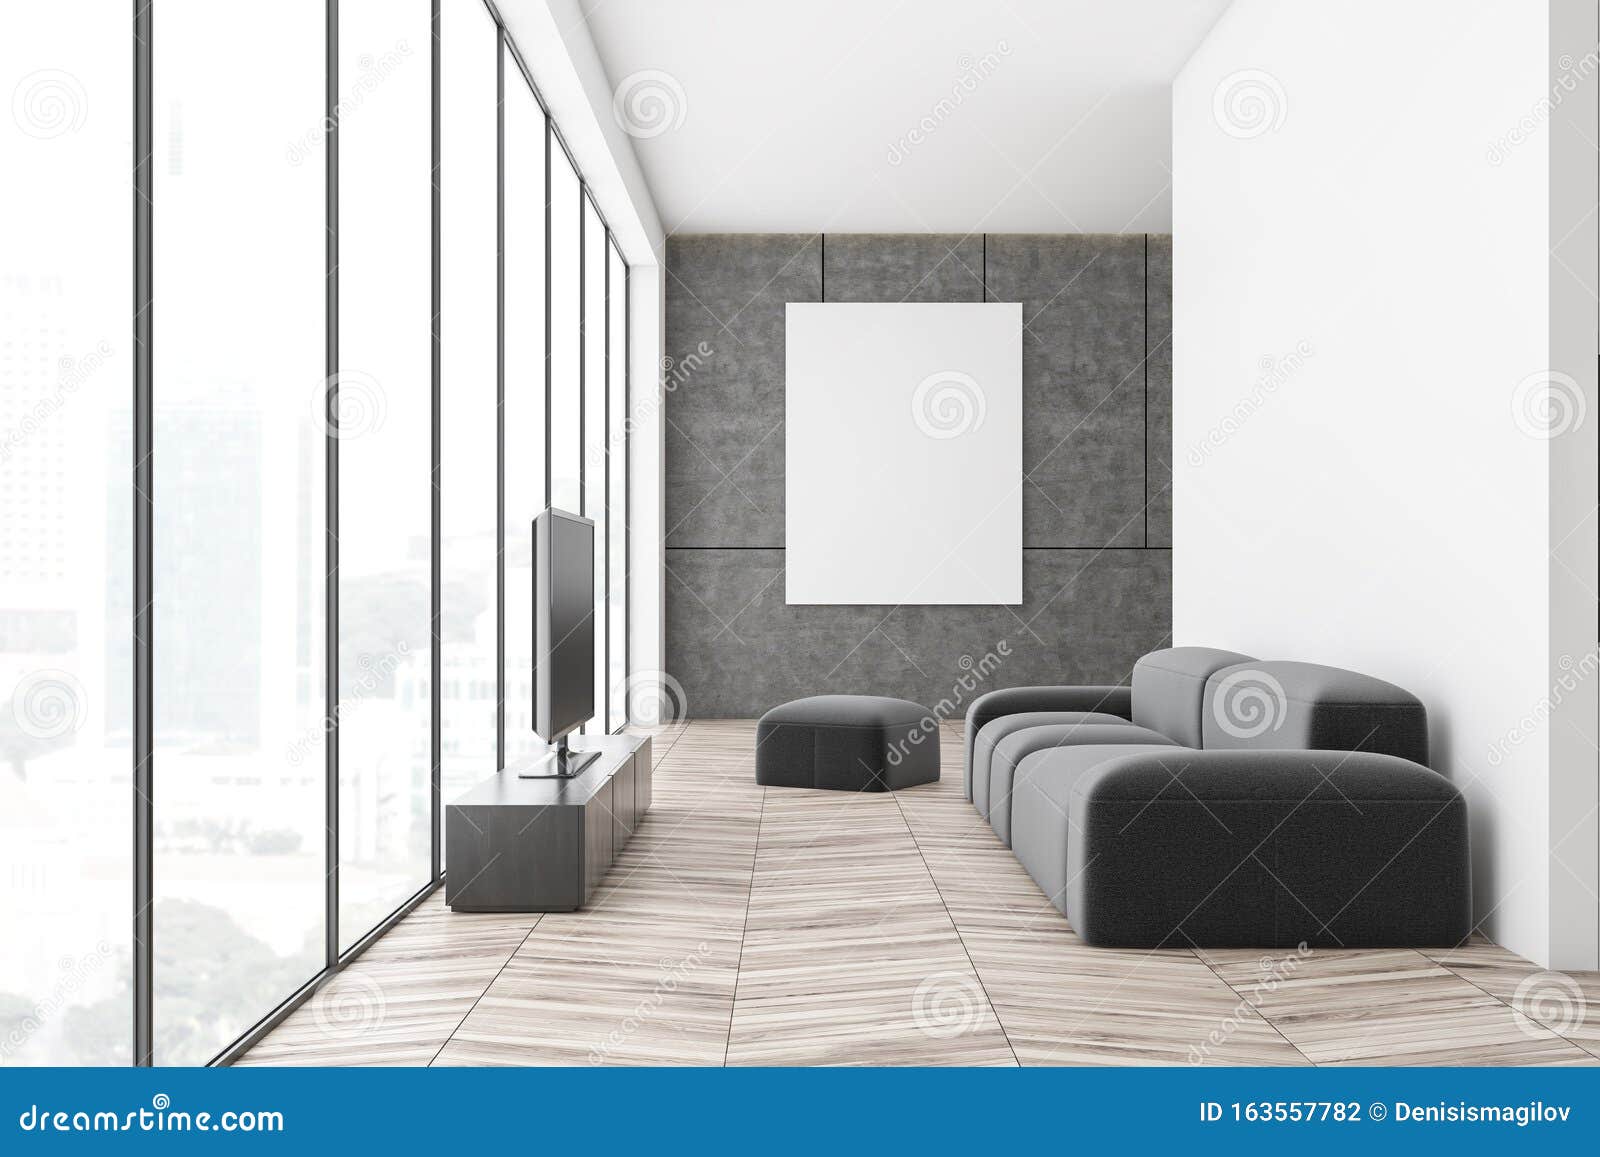 White And Concrete Living Room With Tv Stock Illustration